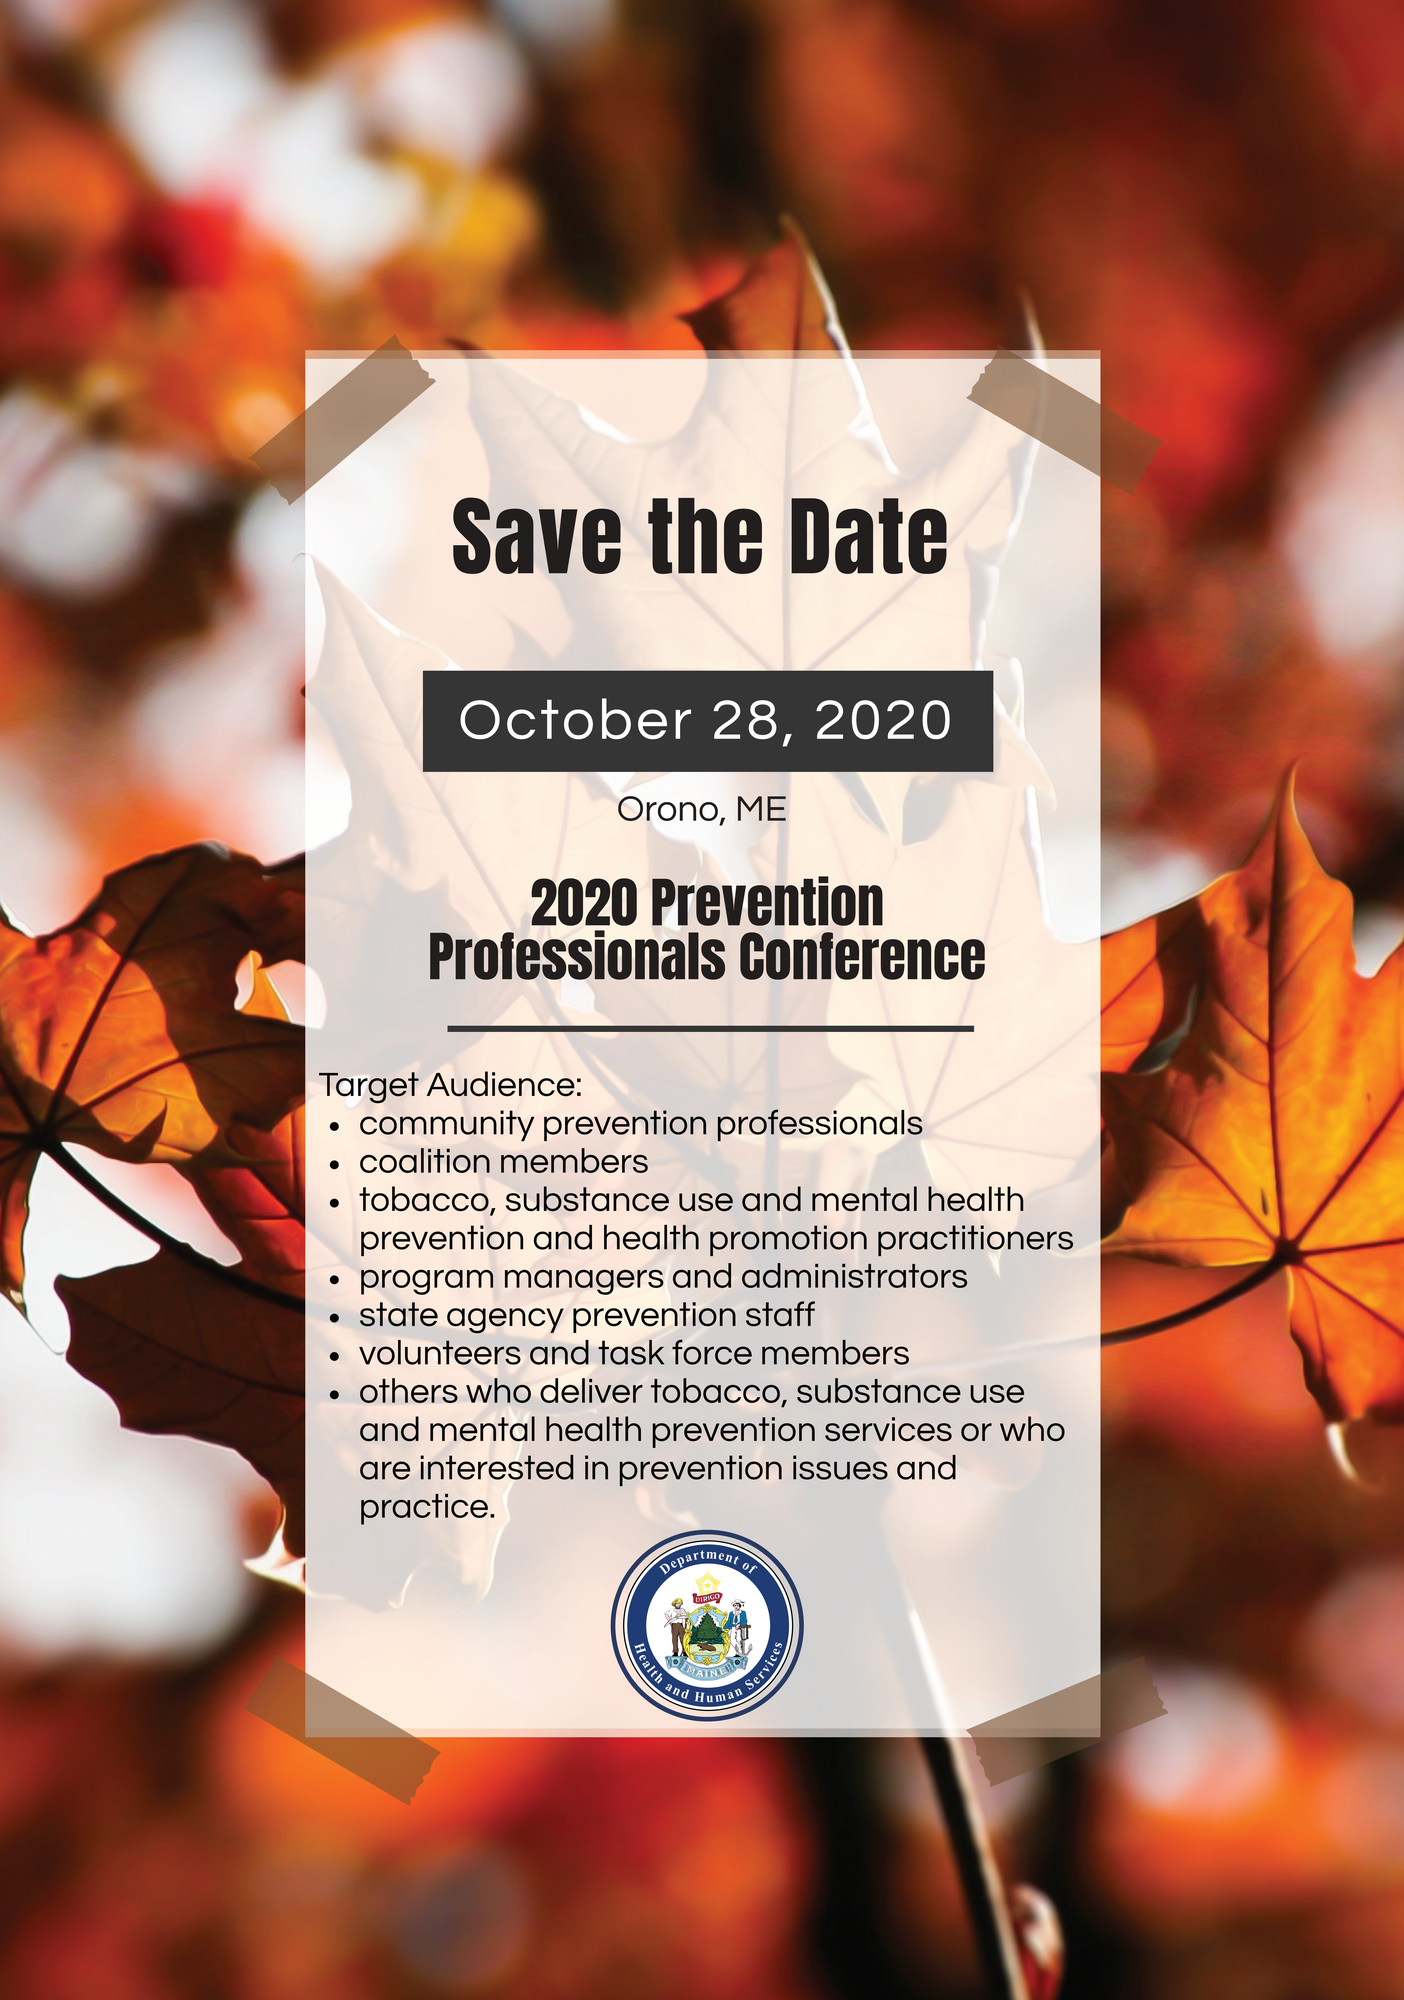 2020 Prevention professionals Conference - Save the Date